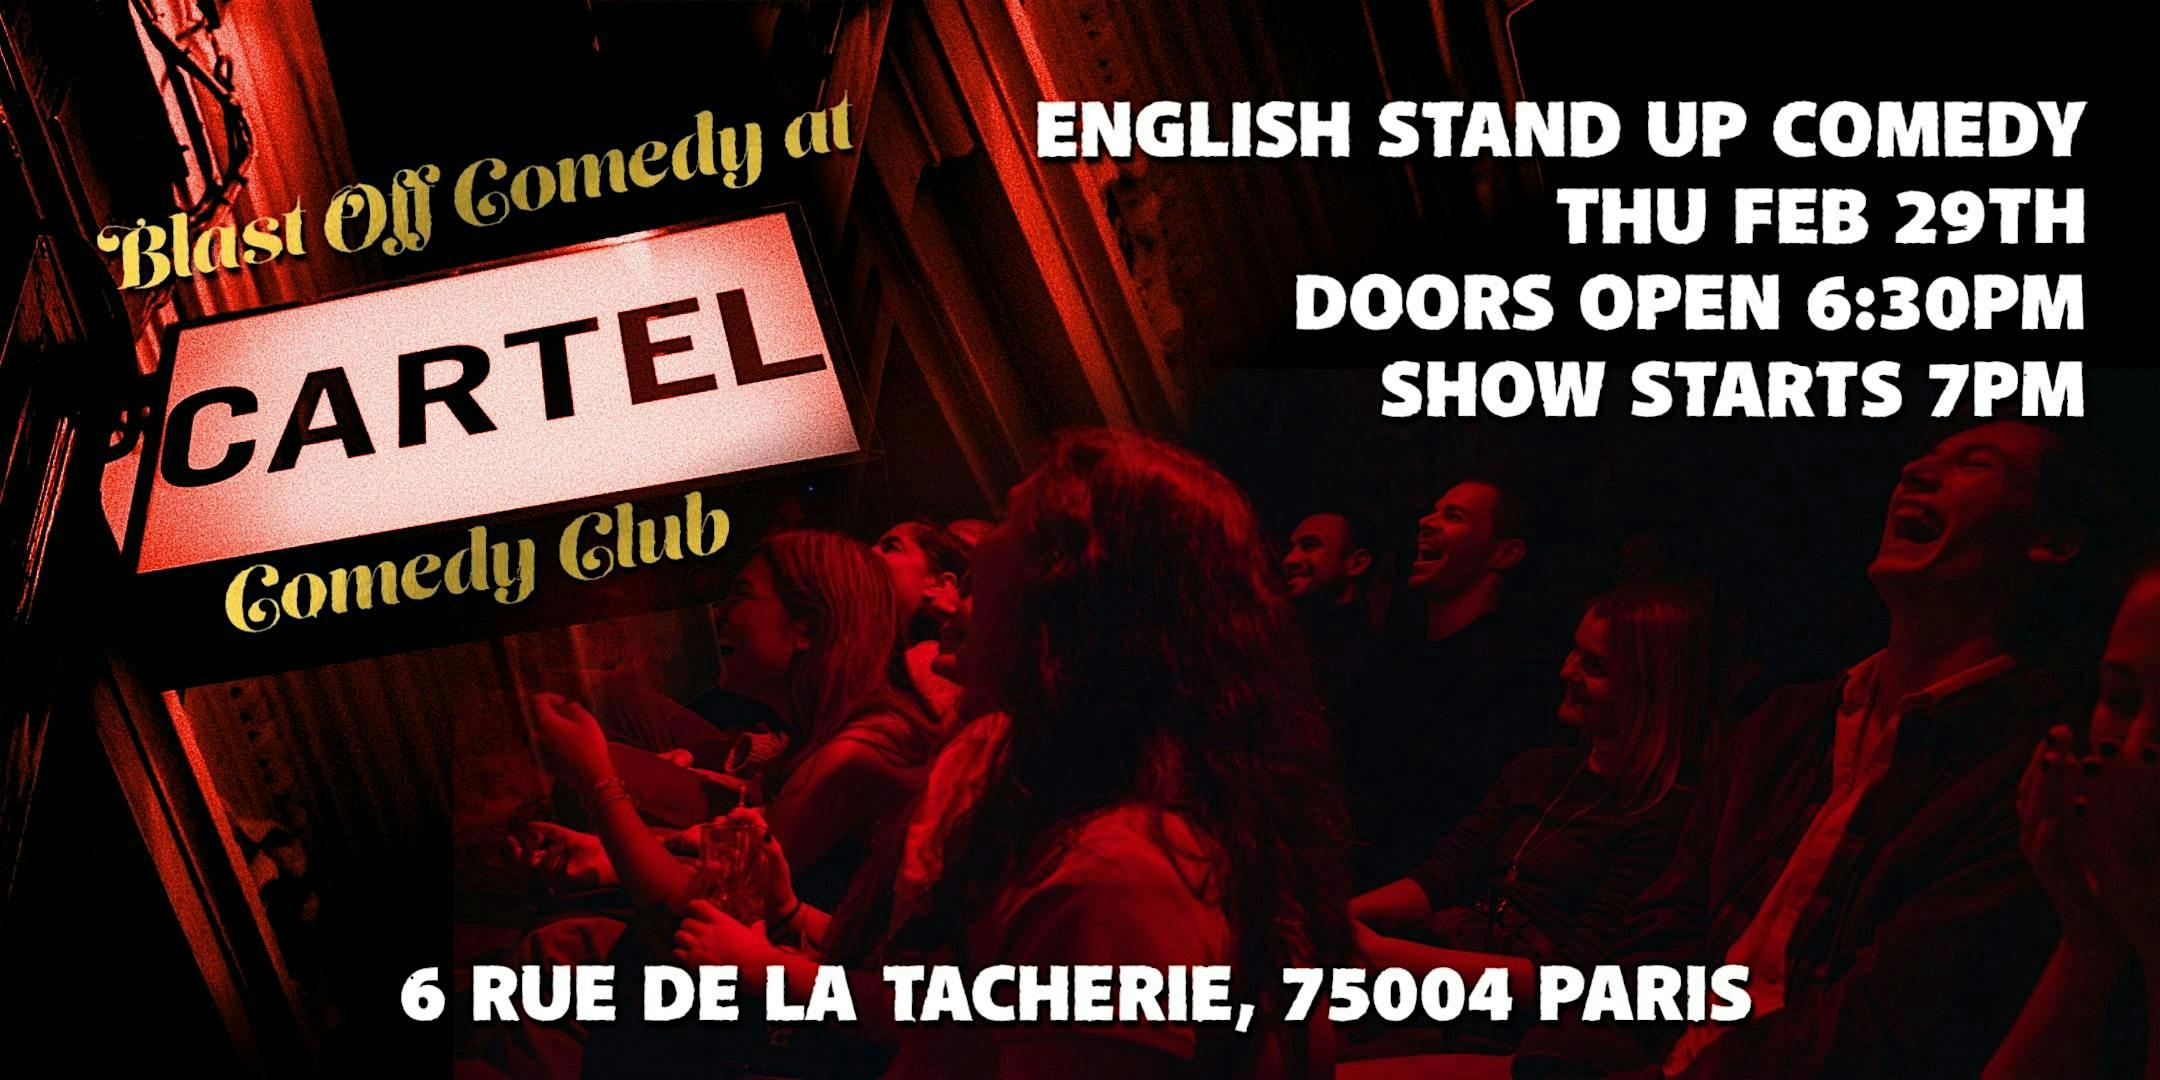 English Stand Up at Cartel Comedy Club logo